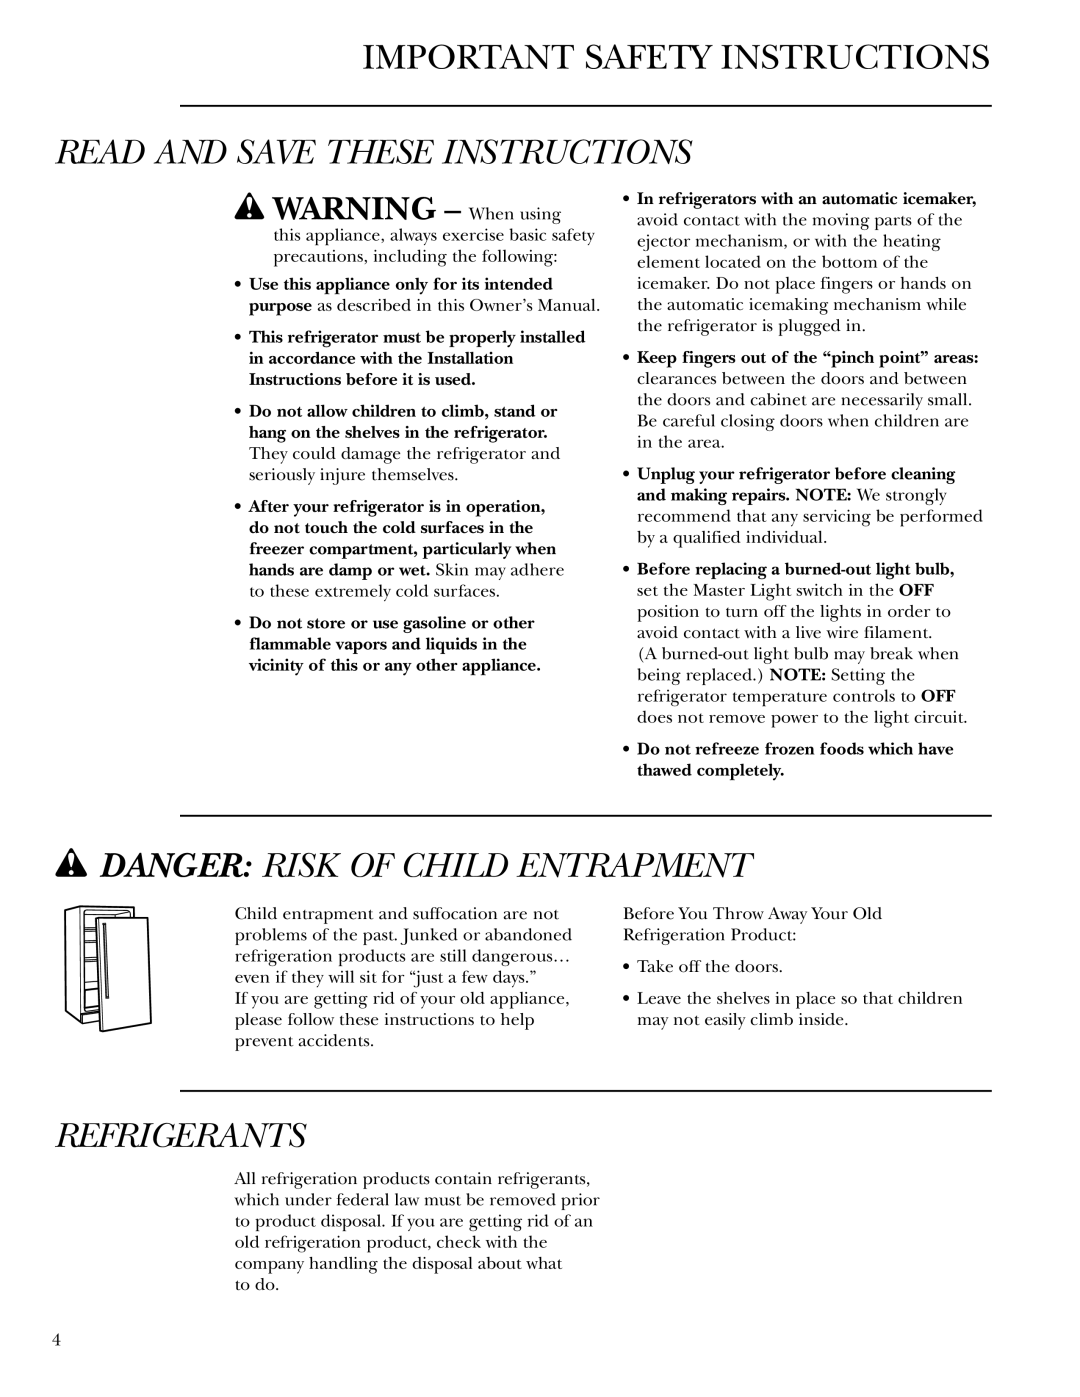 GE Monogram 42, 48 Important Safety Instructions, Read And Save These Instructions, w DANGER RISK OF CHILD ENTRAPMENT 